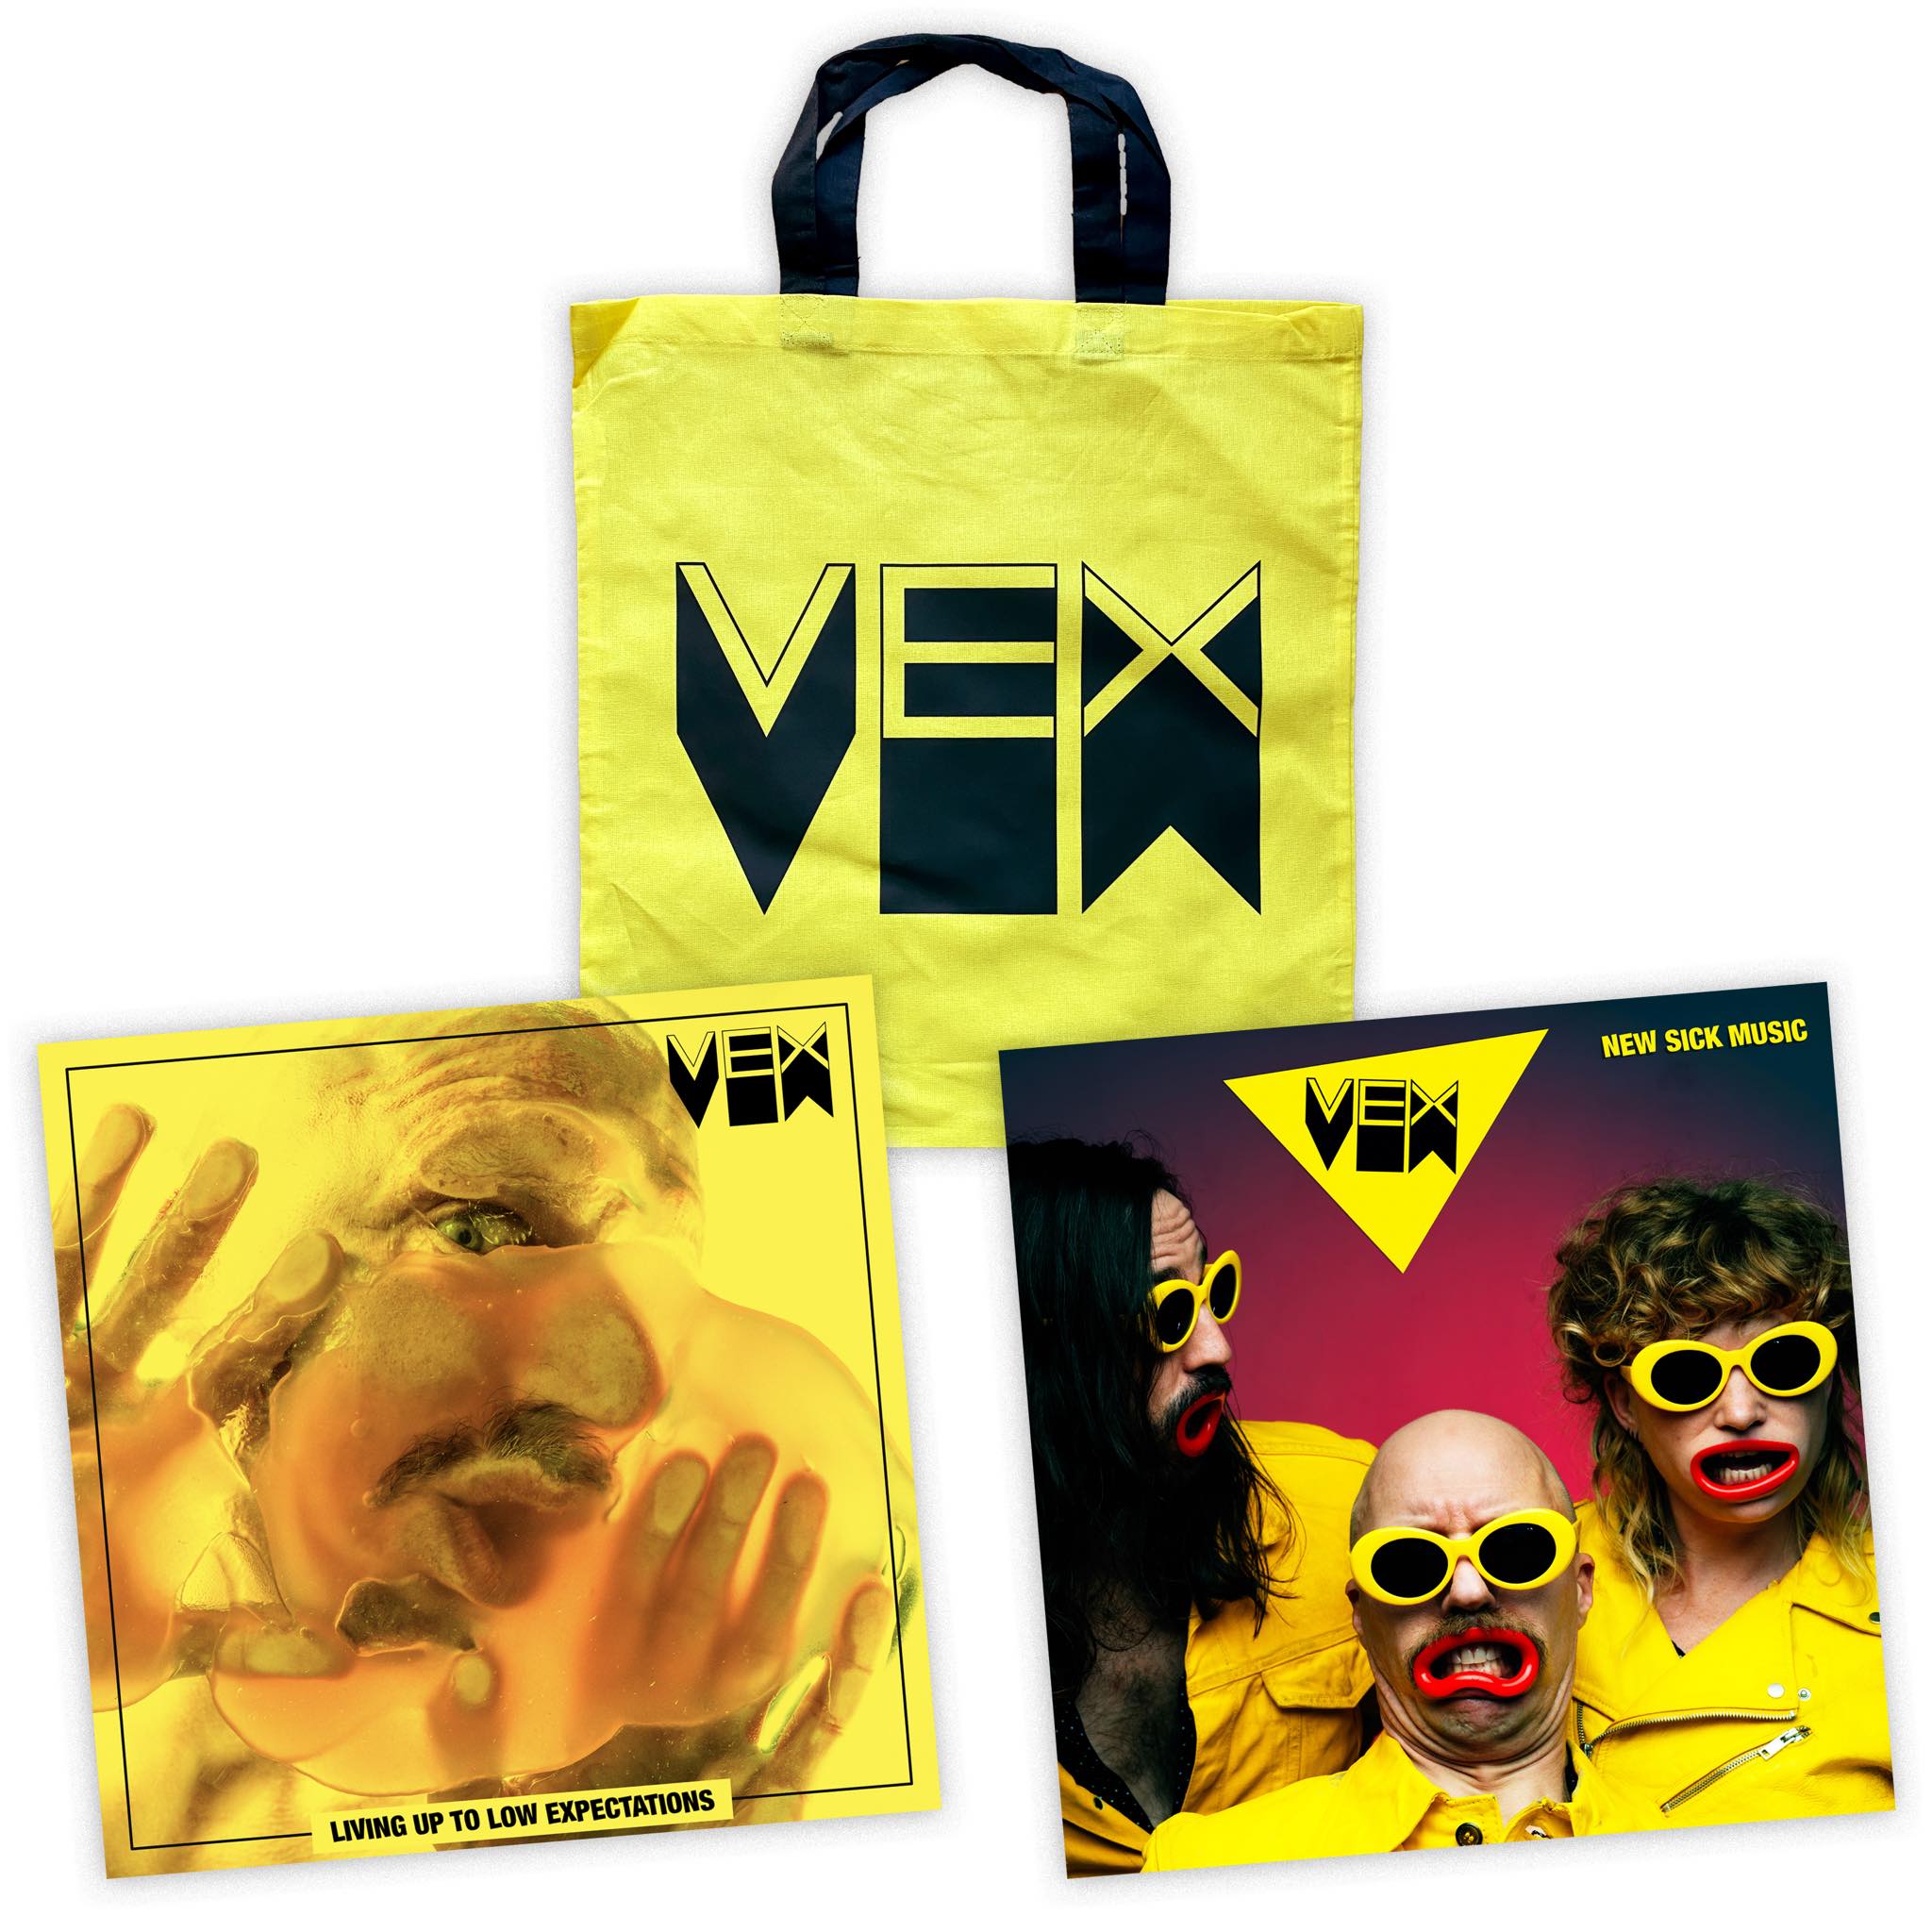 VEX - New Sick Muisc/Living up to low expectations + Tote Bag SUPER BUNDLE